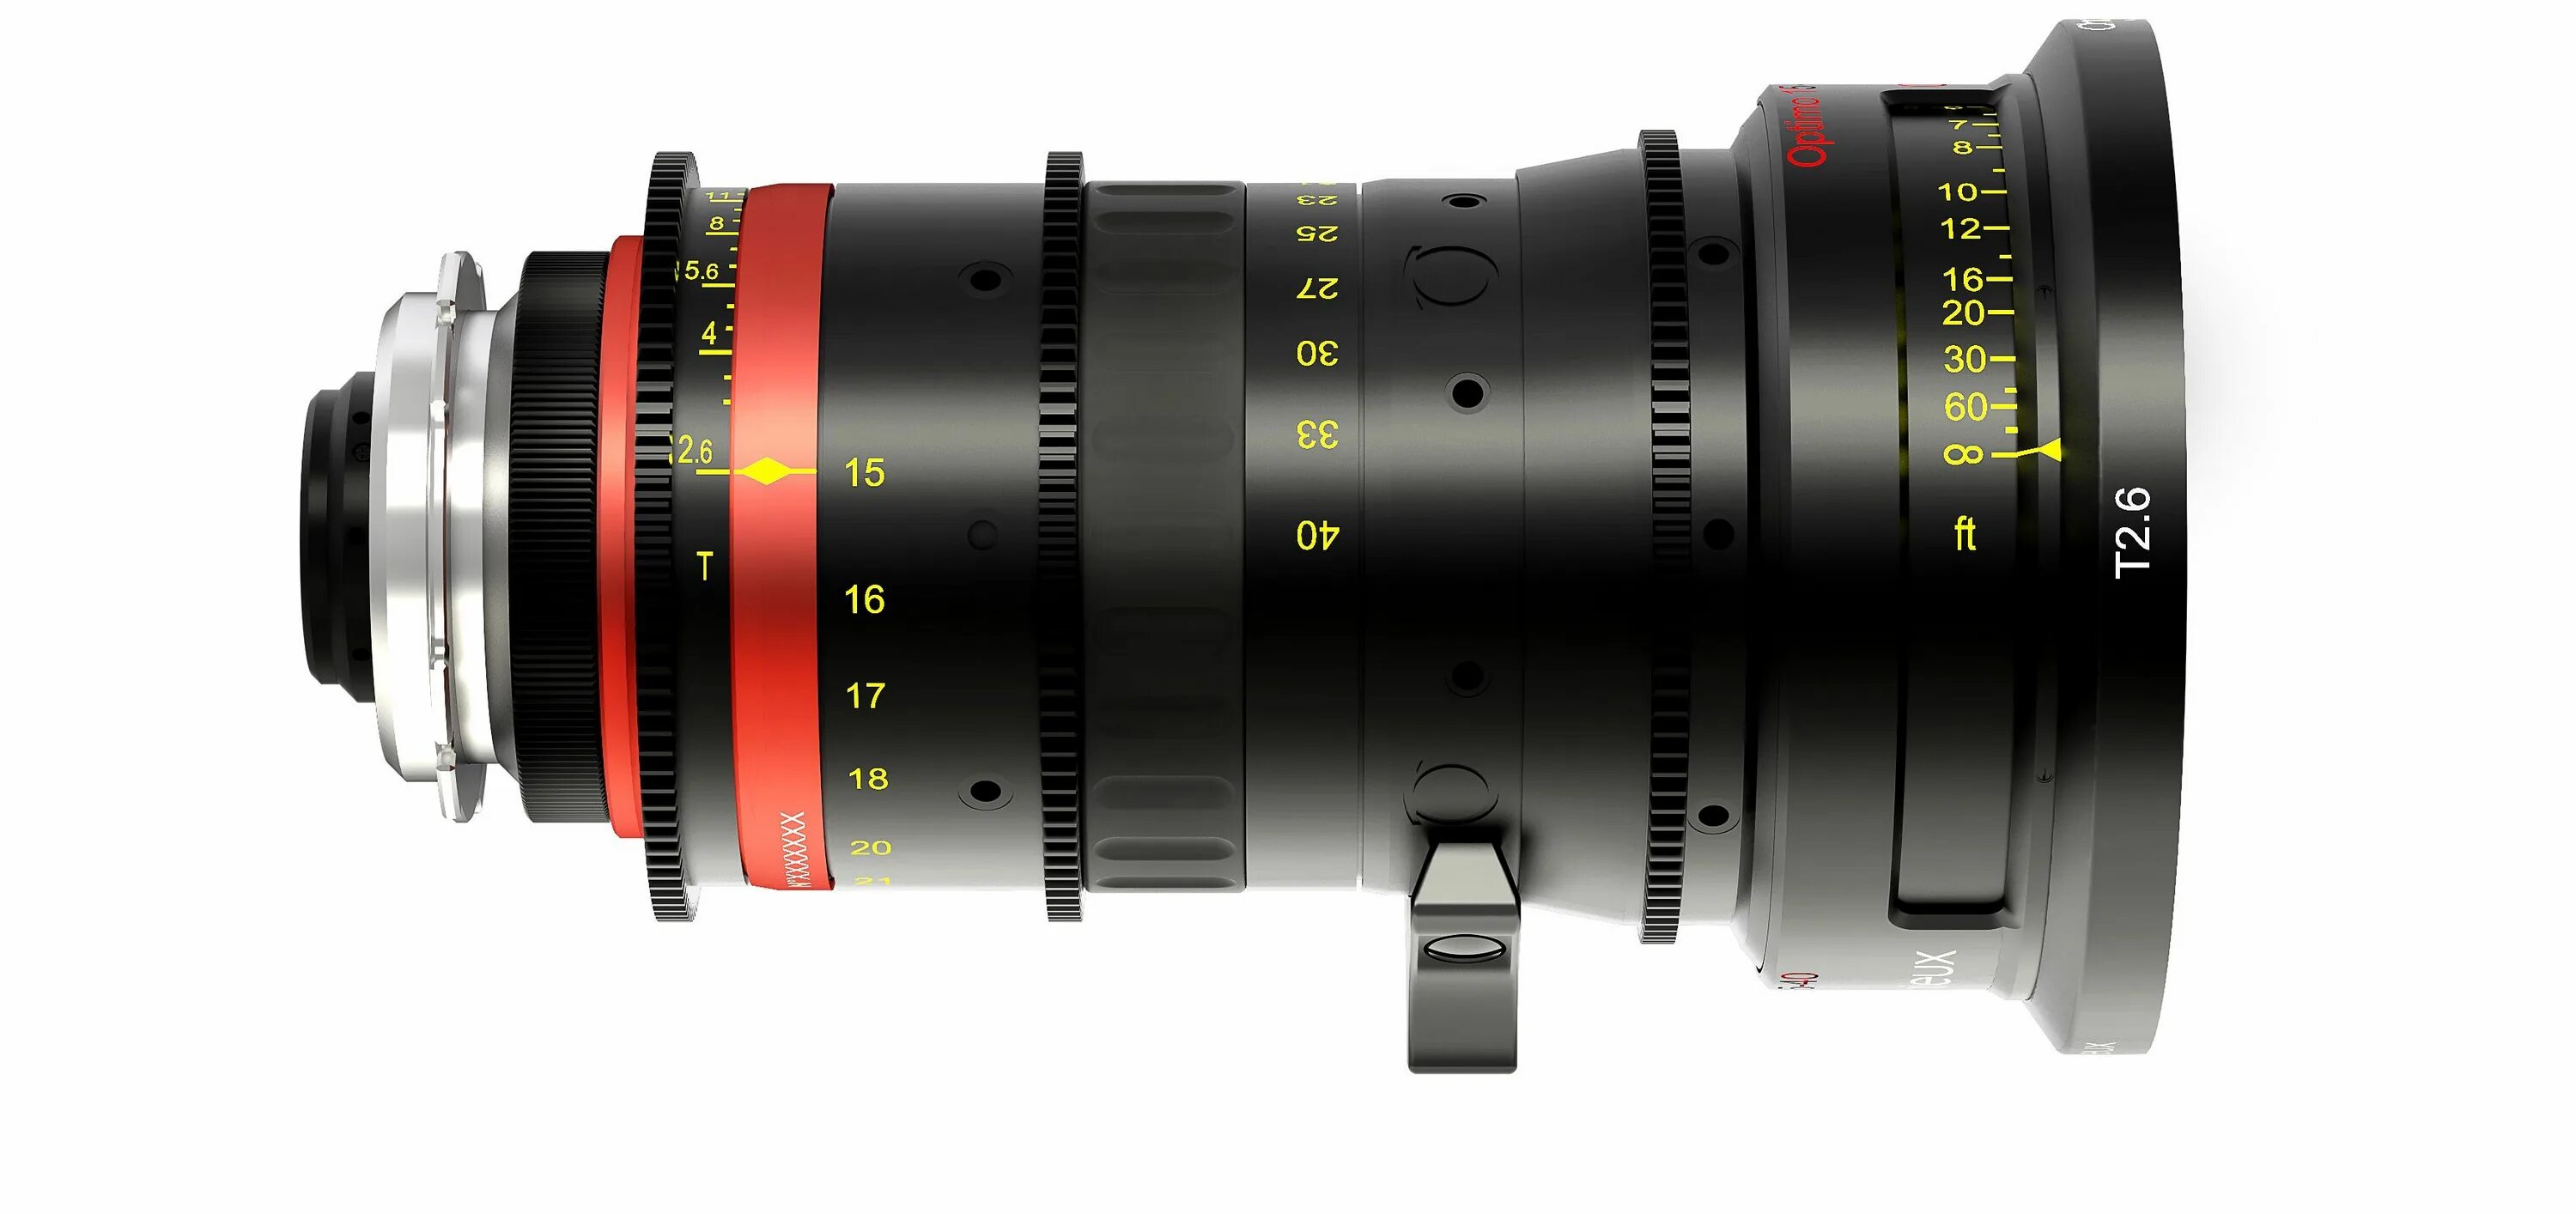 Angenieux Optimo 28-76mm t2.6 Lens. Angenieux Optimo 24-290. Angenieux 15-40. Angenieux 30-90. Объективы 40mm